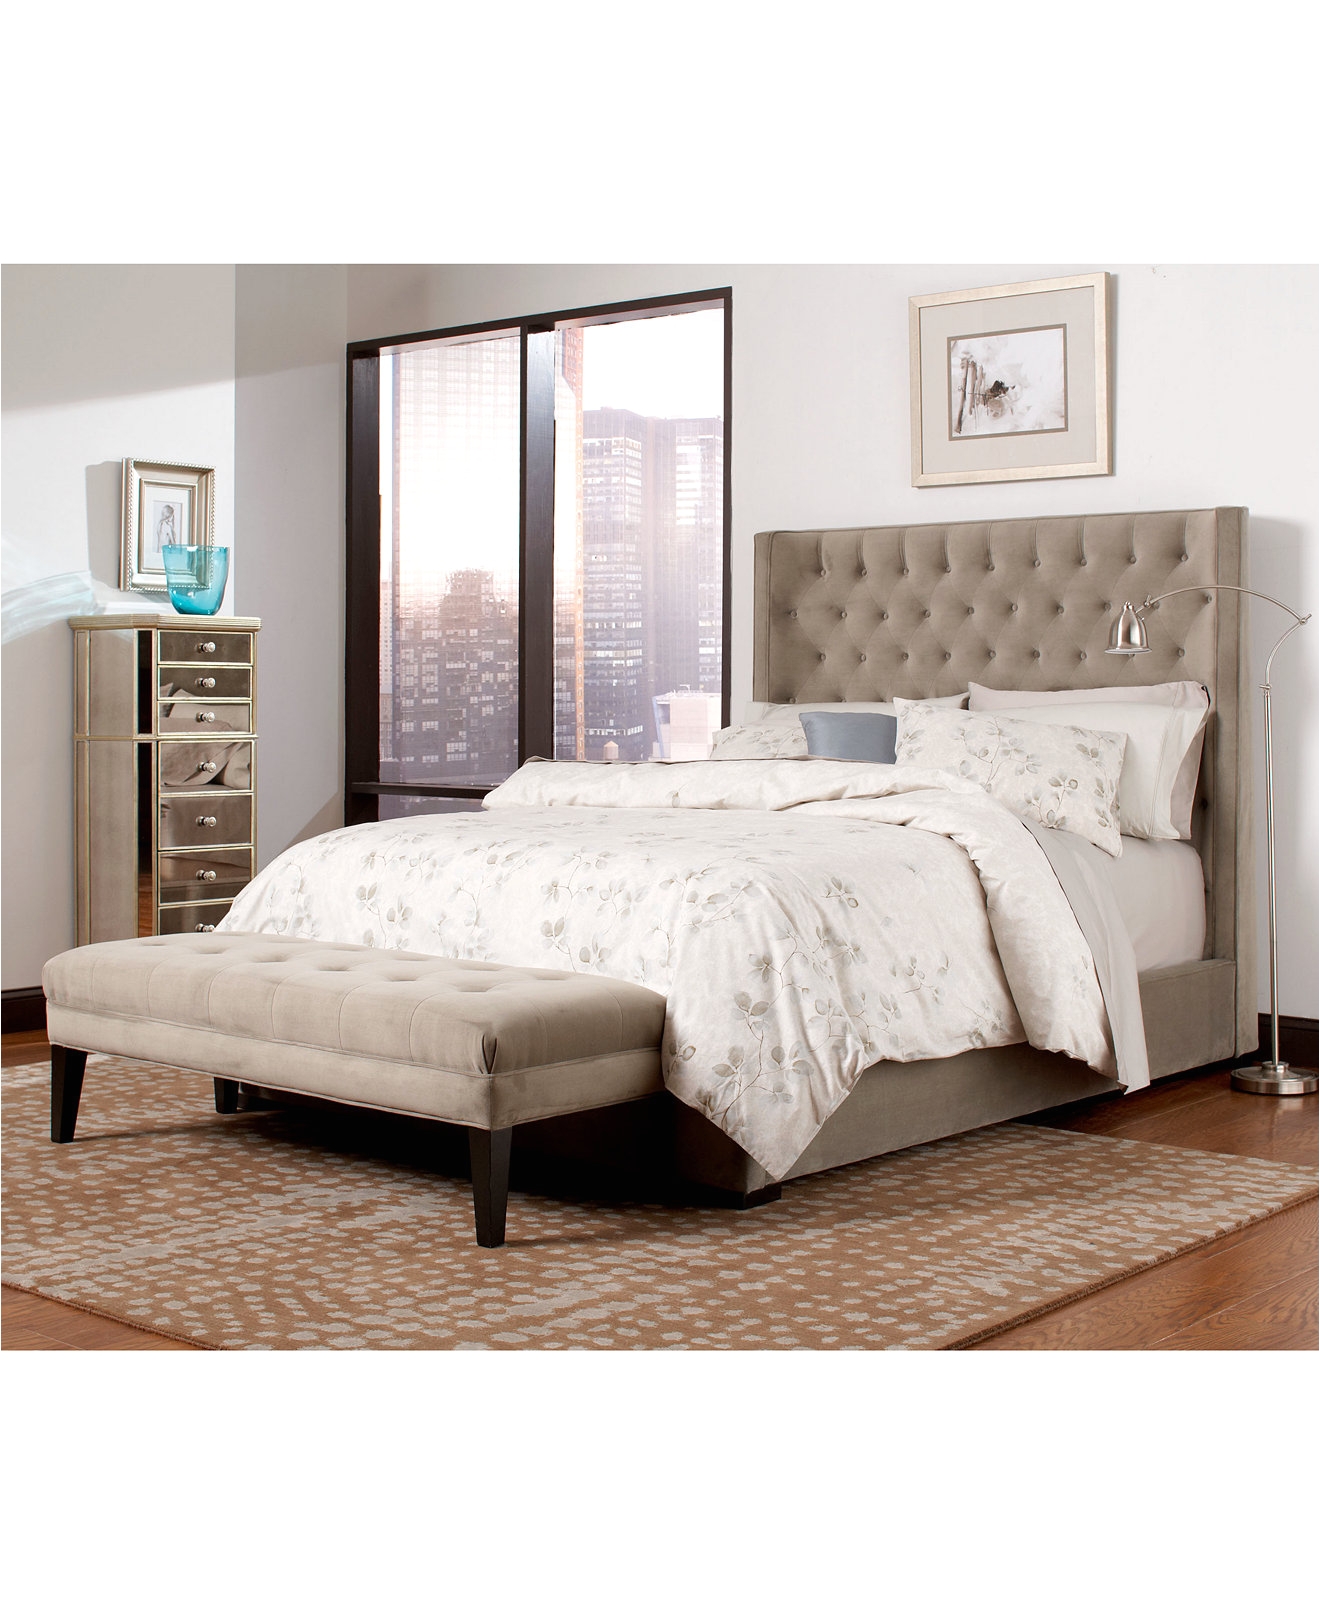 macy s bedroom furniture macys bedroom furniture furniture design and home decoration 2017 with regard to macys bedroom furniture osopalas com